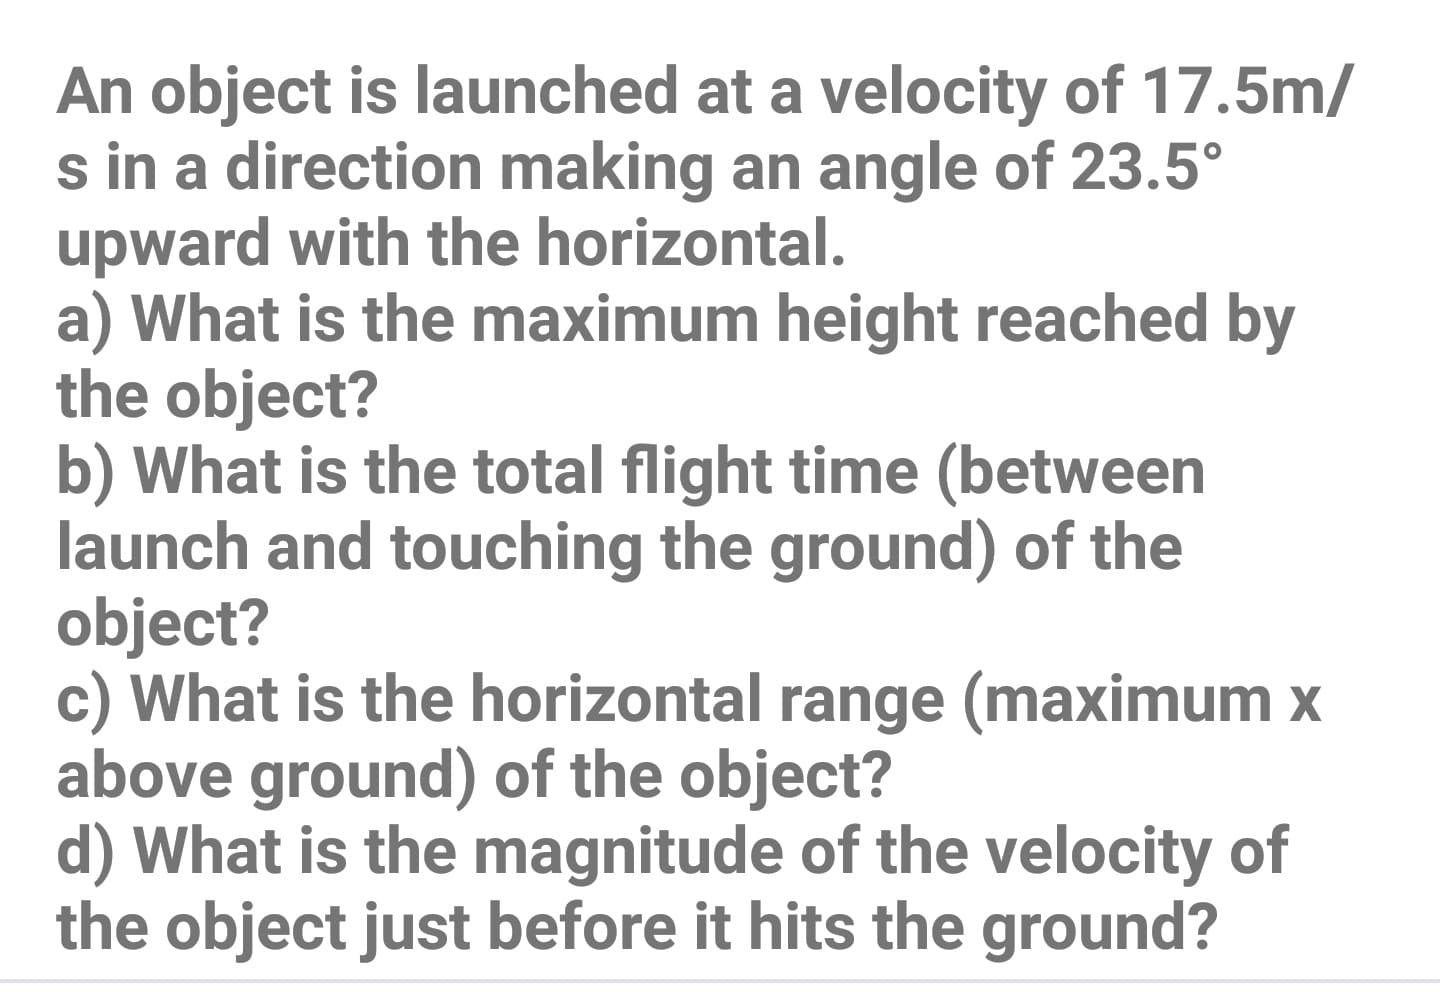 An object is launched at a velocity of 17.5m/
s in a direction making an angle of 23.5°
upward with the horizontal.
a) What is the maximum height reached by
the object?
b) What is the total flight time (between
launch and touching the ground) of the
object?
c) What is the horizontal range (maximum x
above ground) of the object?
d) What is the magnitude of the velocity of
the object just before it hits the ground?
